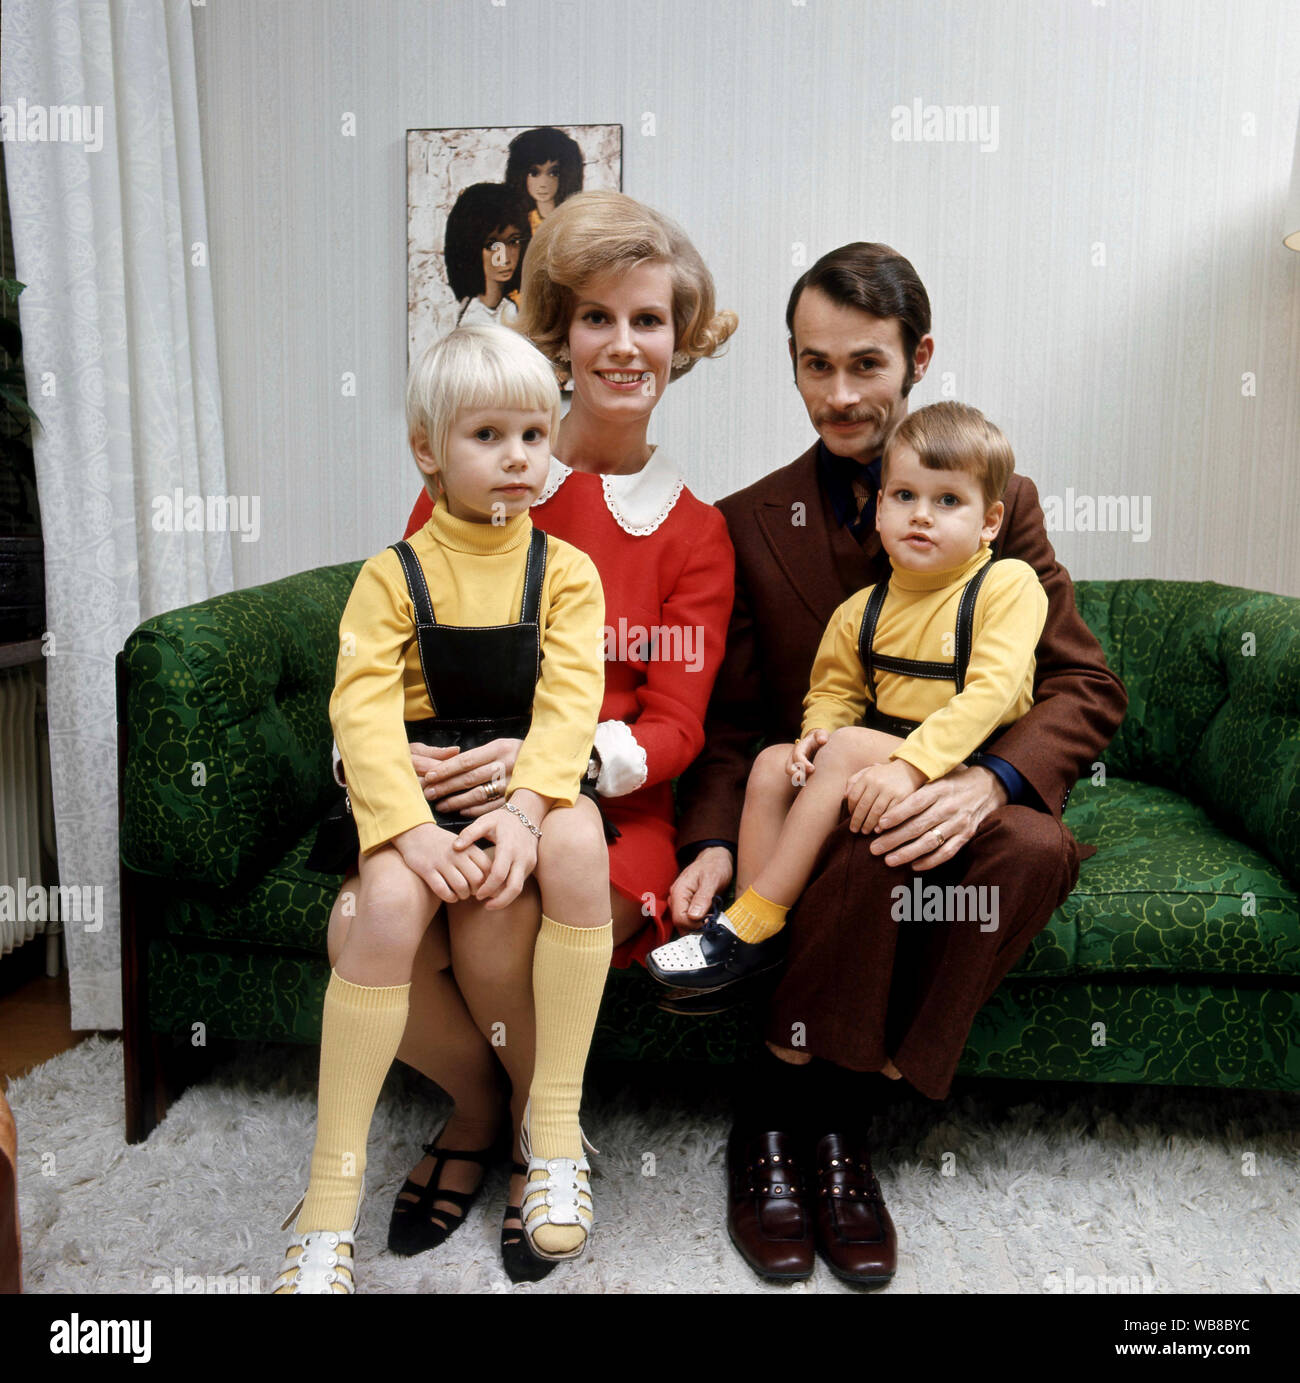 1960s parents. A mother and father are sitting together with their children in a green sofa. Sweden 1969 Stock Photo